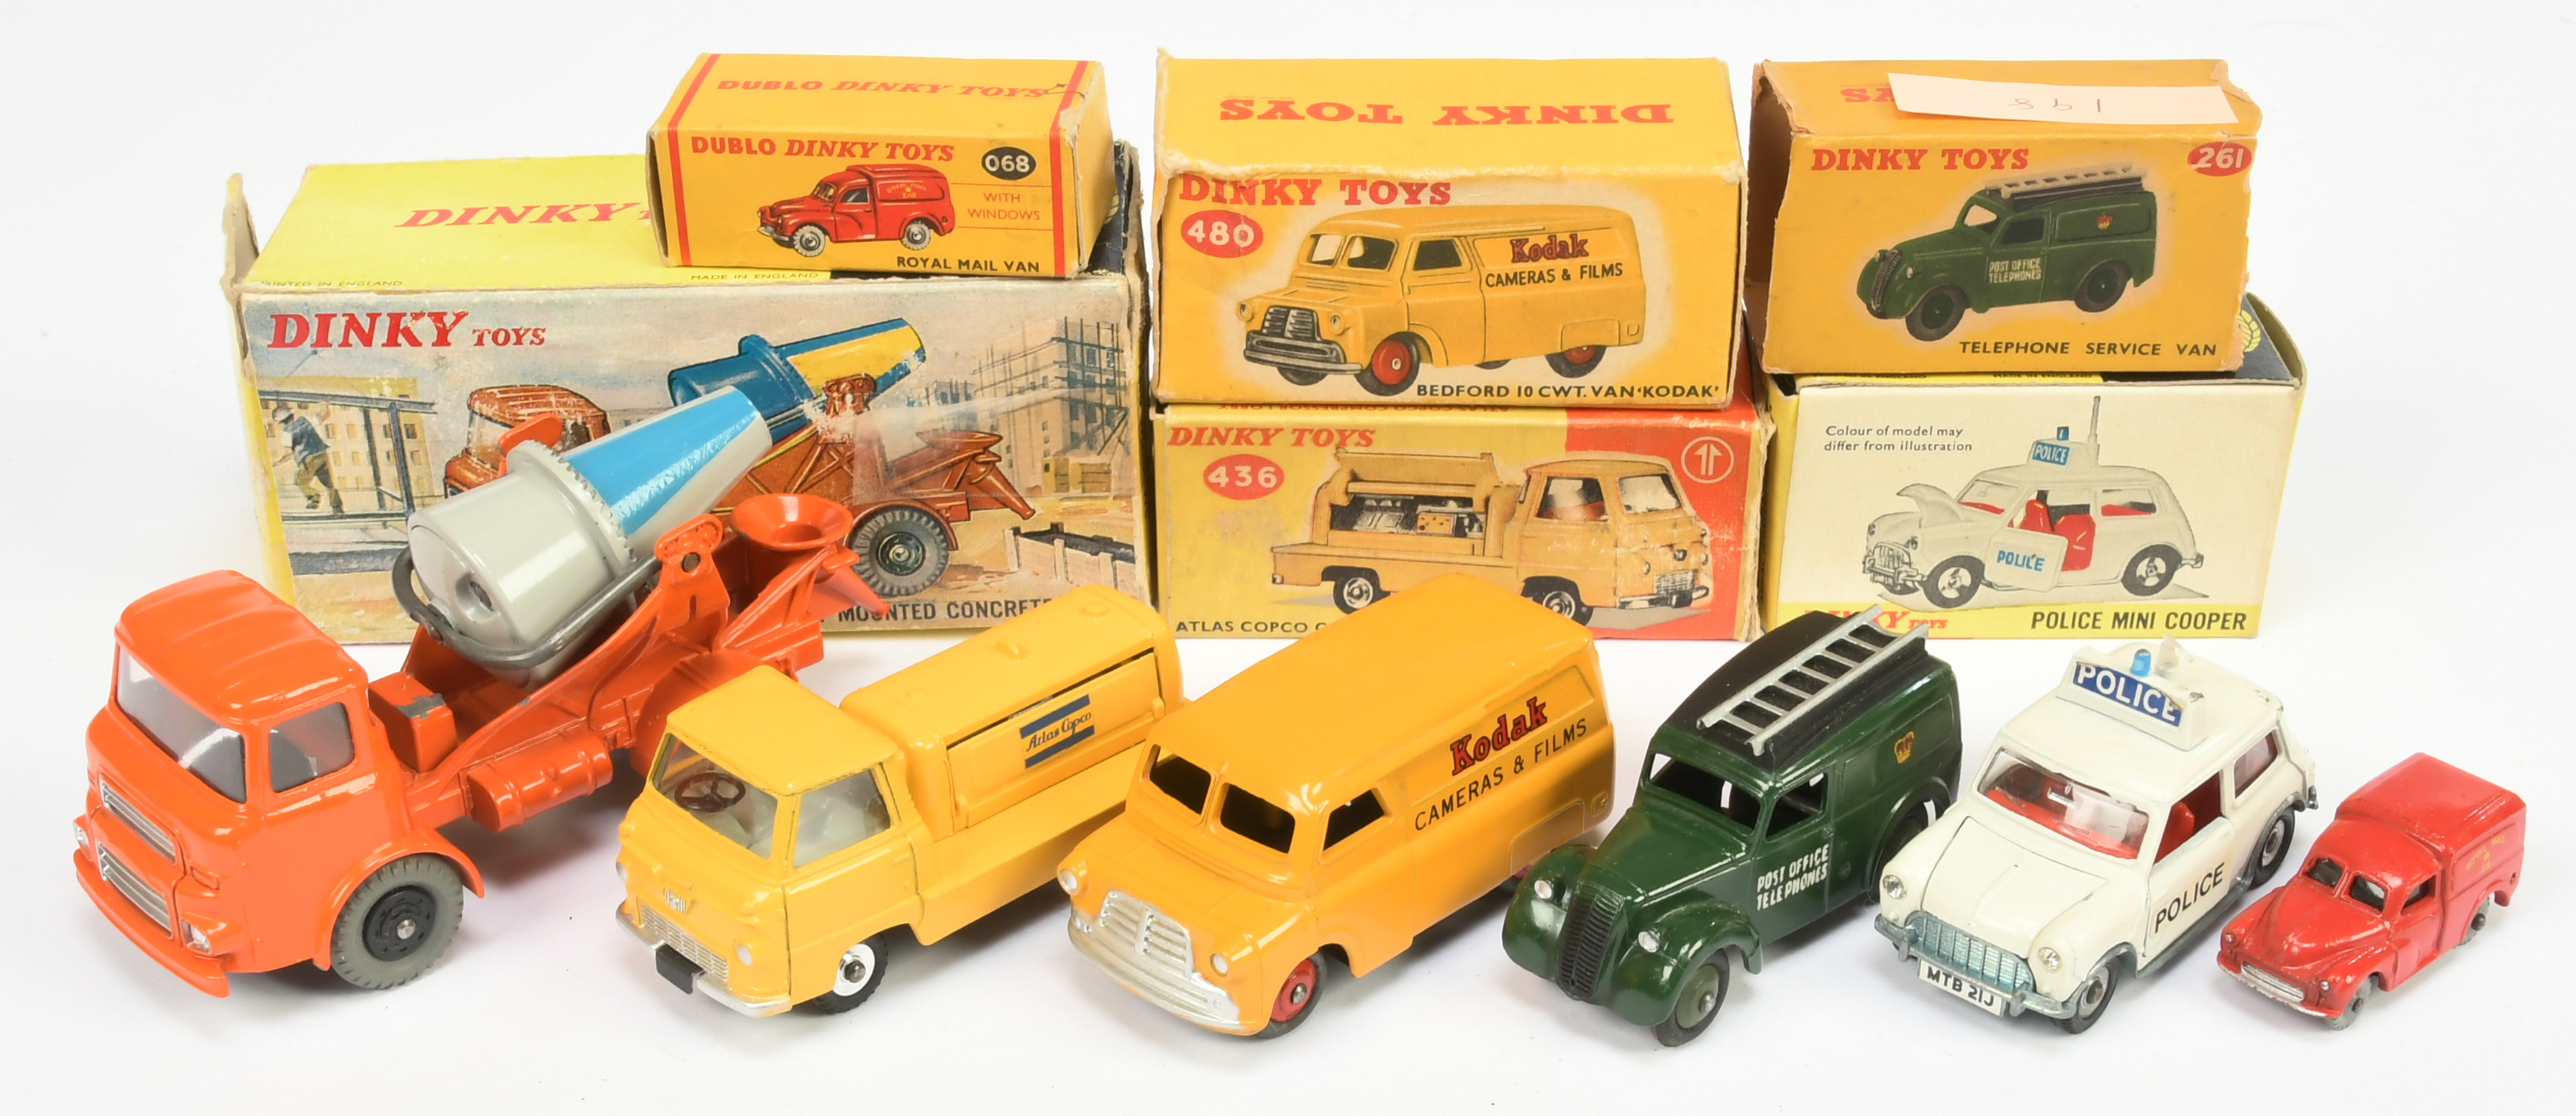 Dinky Toys Group to Include 480 Bedford Van "Kodak", 250 "Police" Mini, 960 Albion Chieftain Ceme...